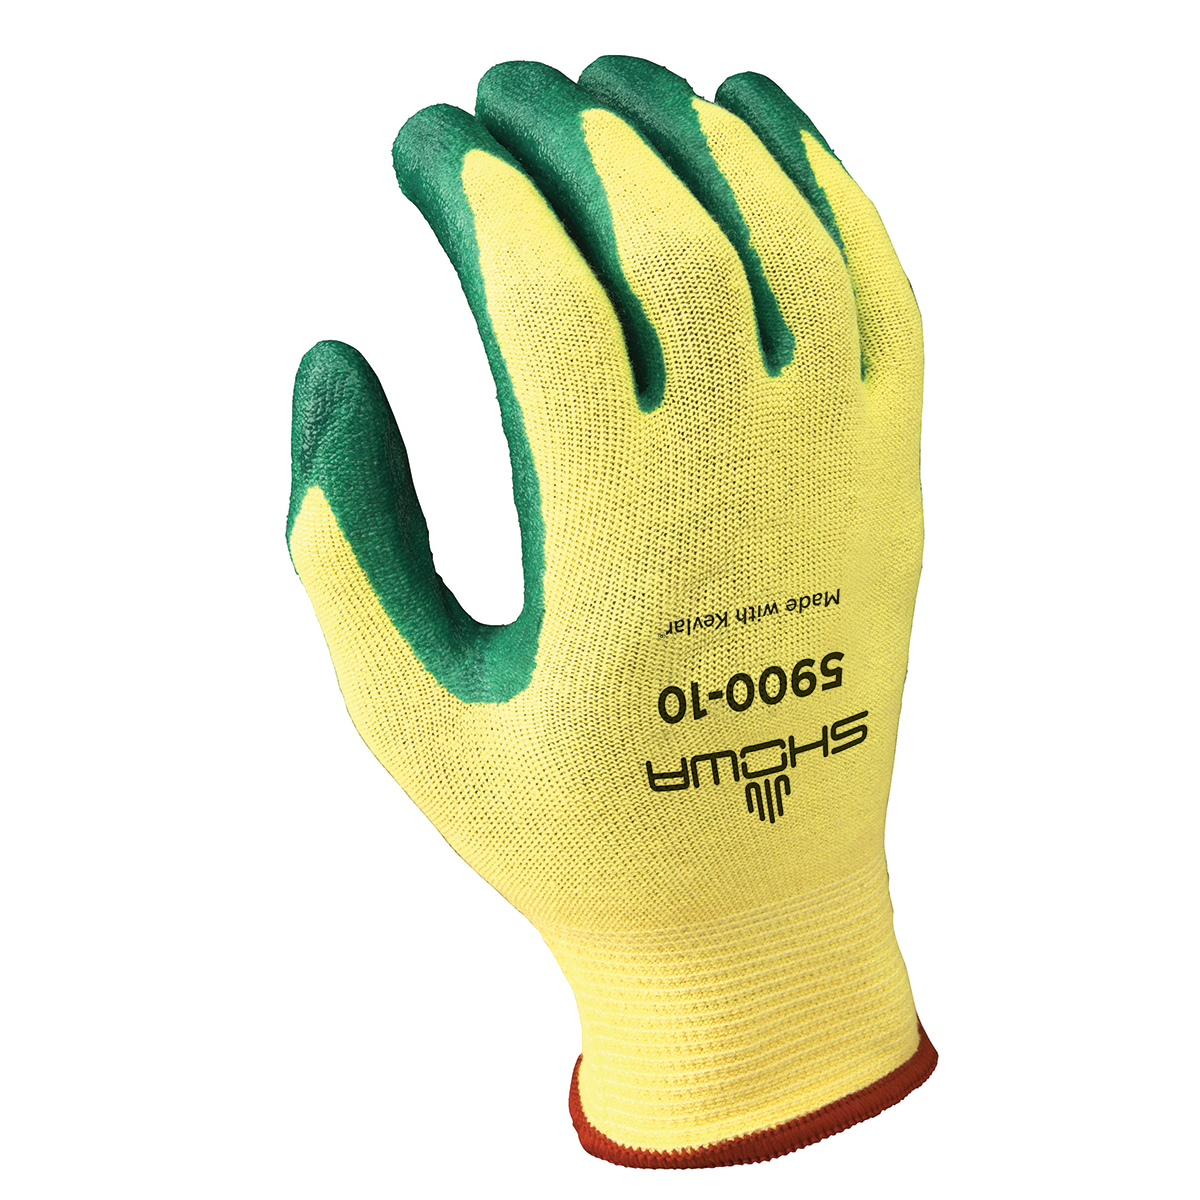 Cut resistant, nitrile-coated flat-dipped, yellow/green dip, seamless, cut-resistant, Kevlar®-Lycra® shell, small ANSI CUT LEVEL A3